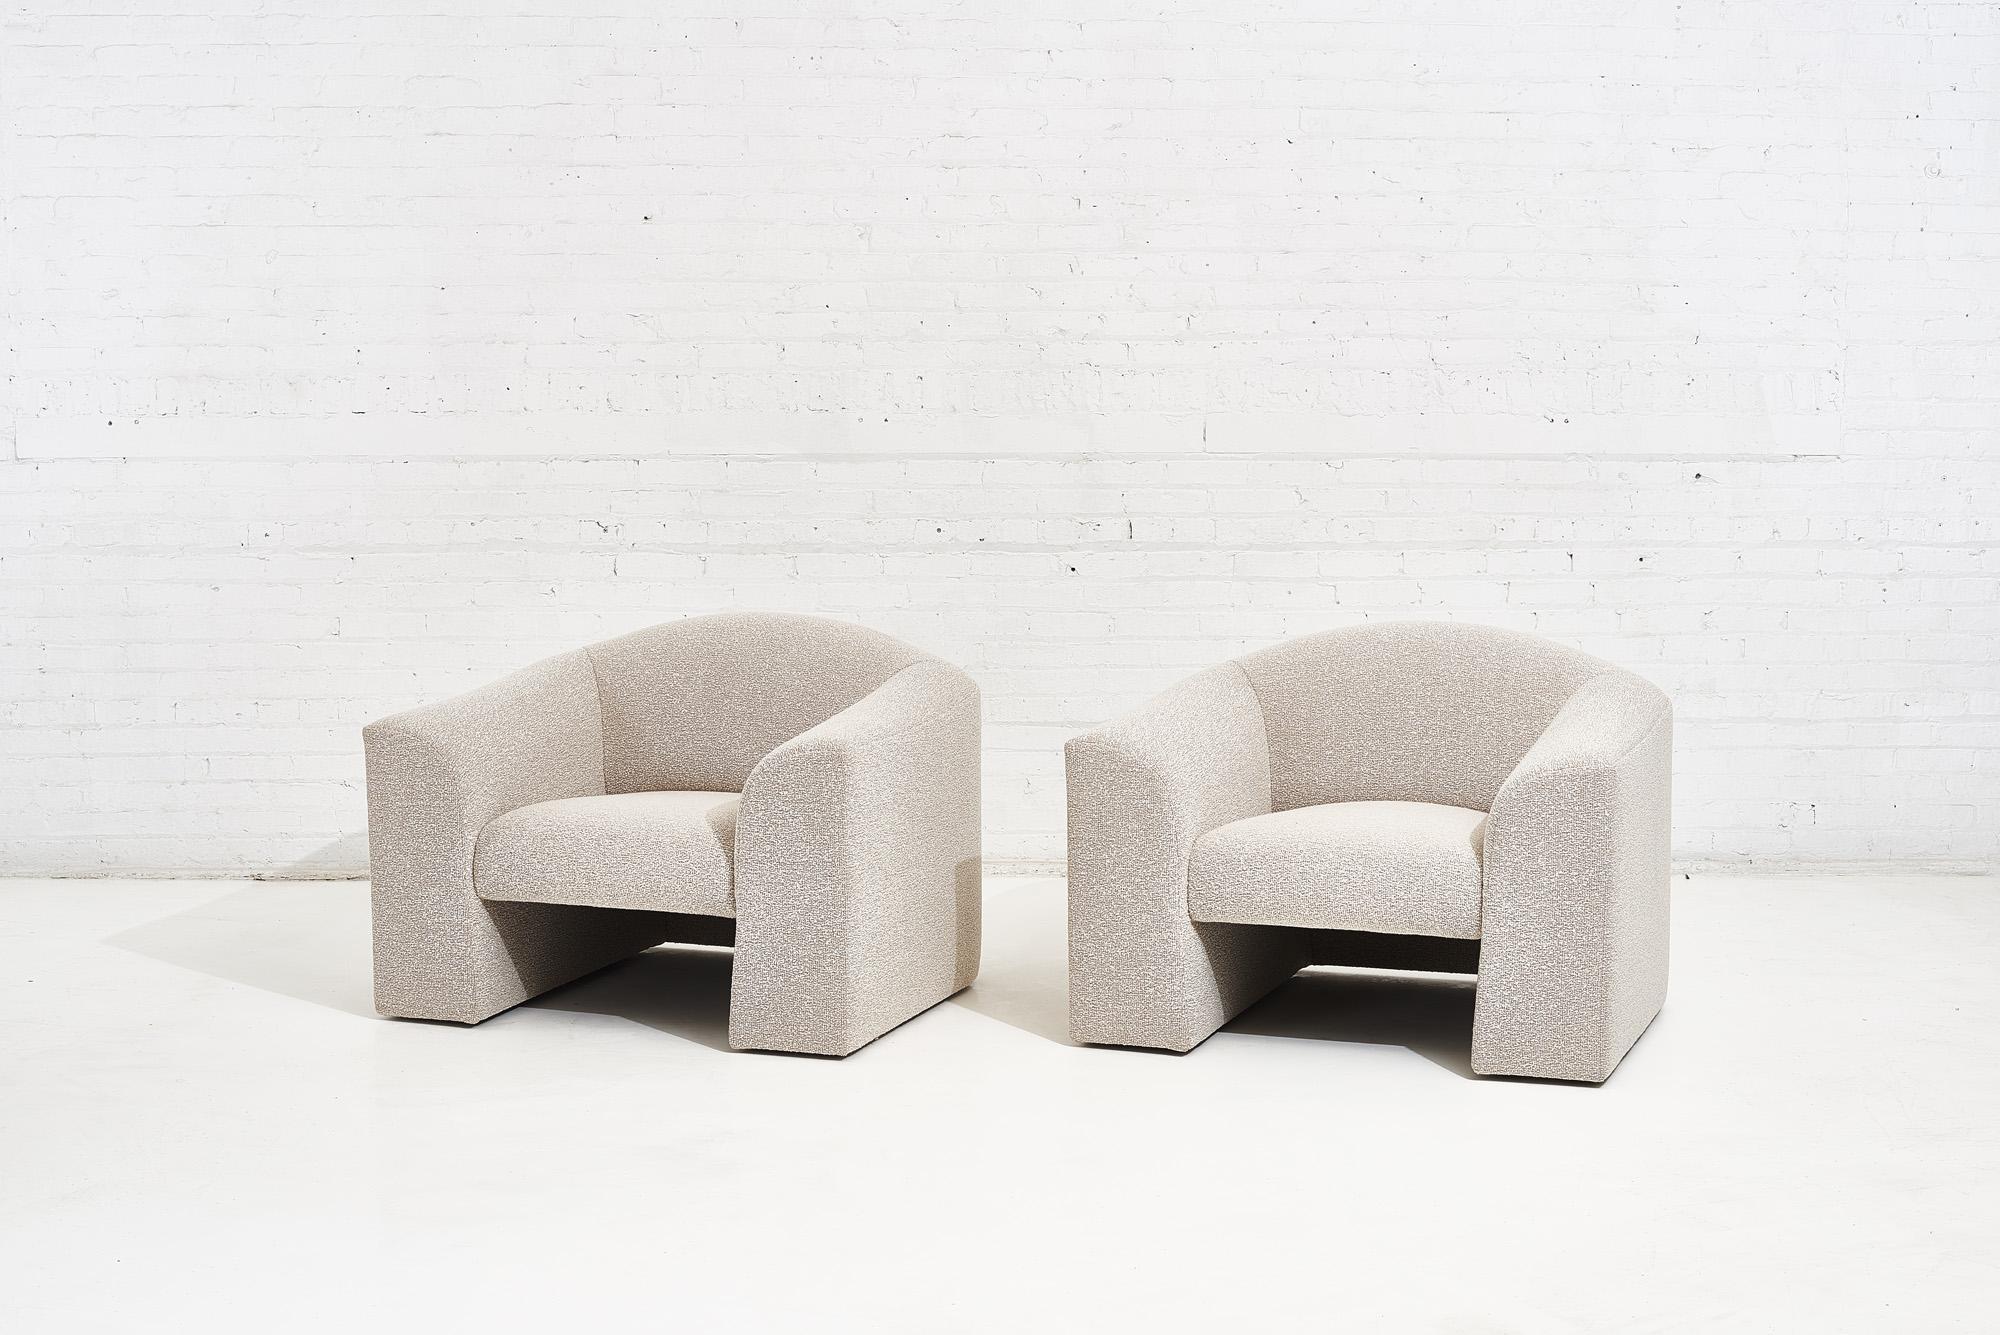 Brayton “Lario” lounge chairs in white boucle, circa 1980’s.  Designed by Walter Knoll.  Fully restored in off white boucle.